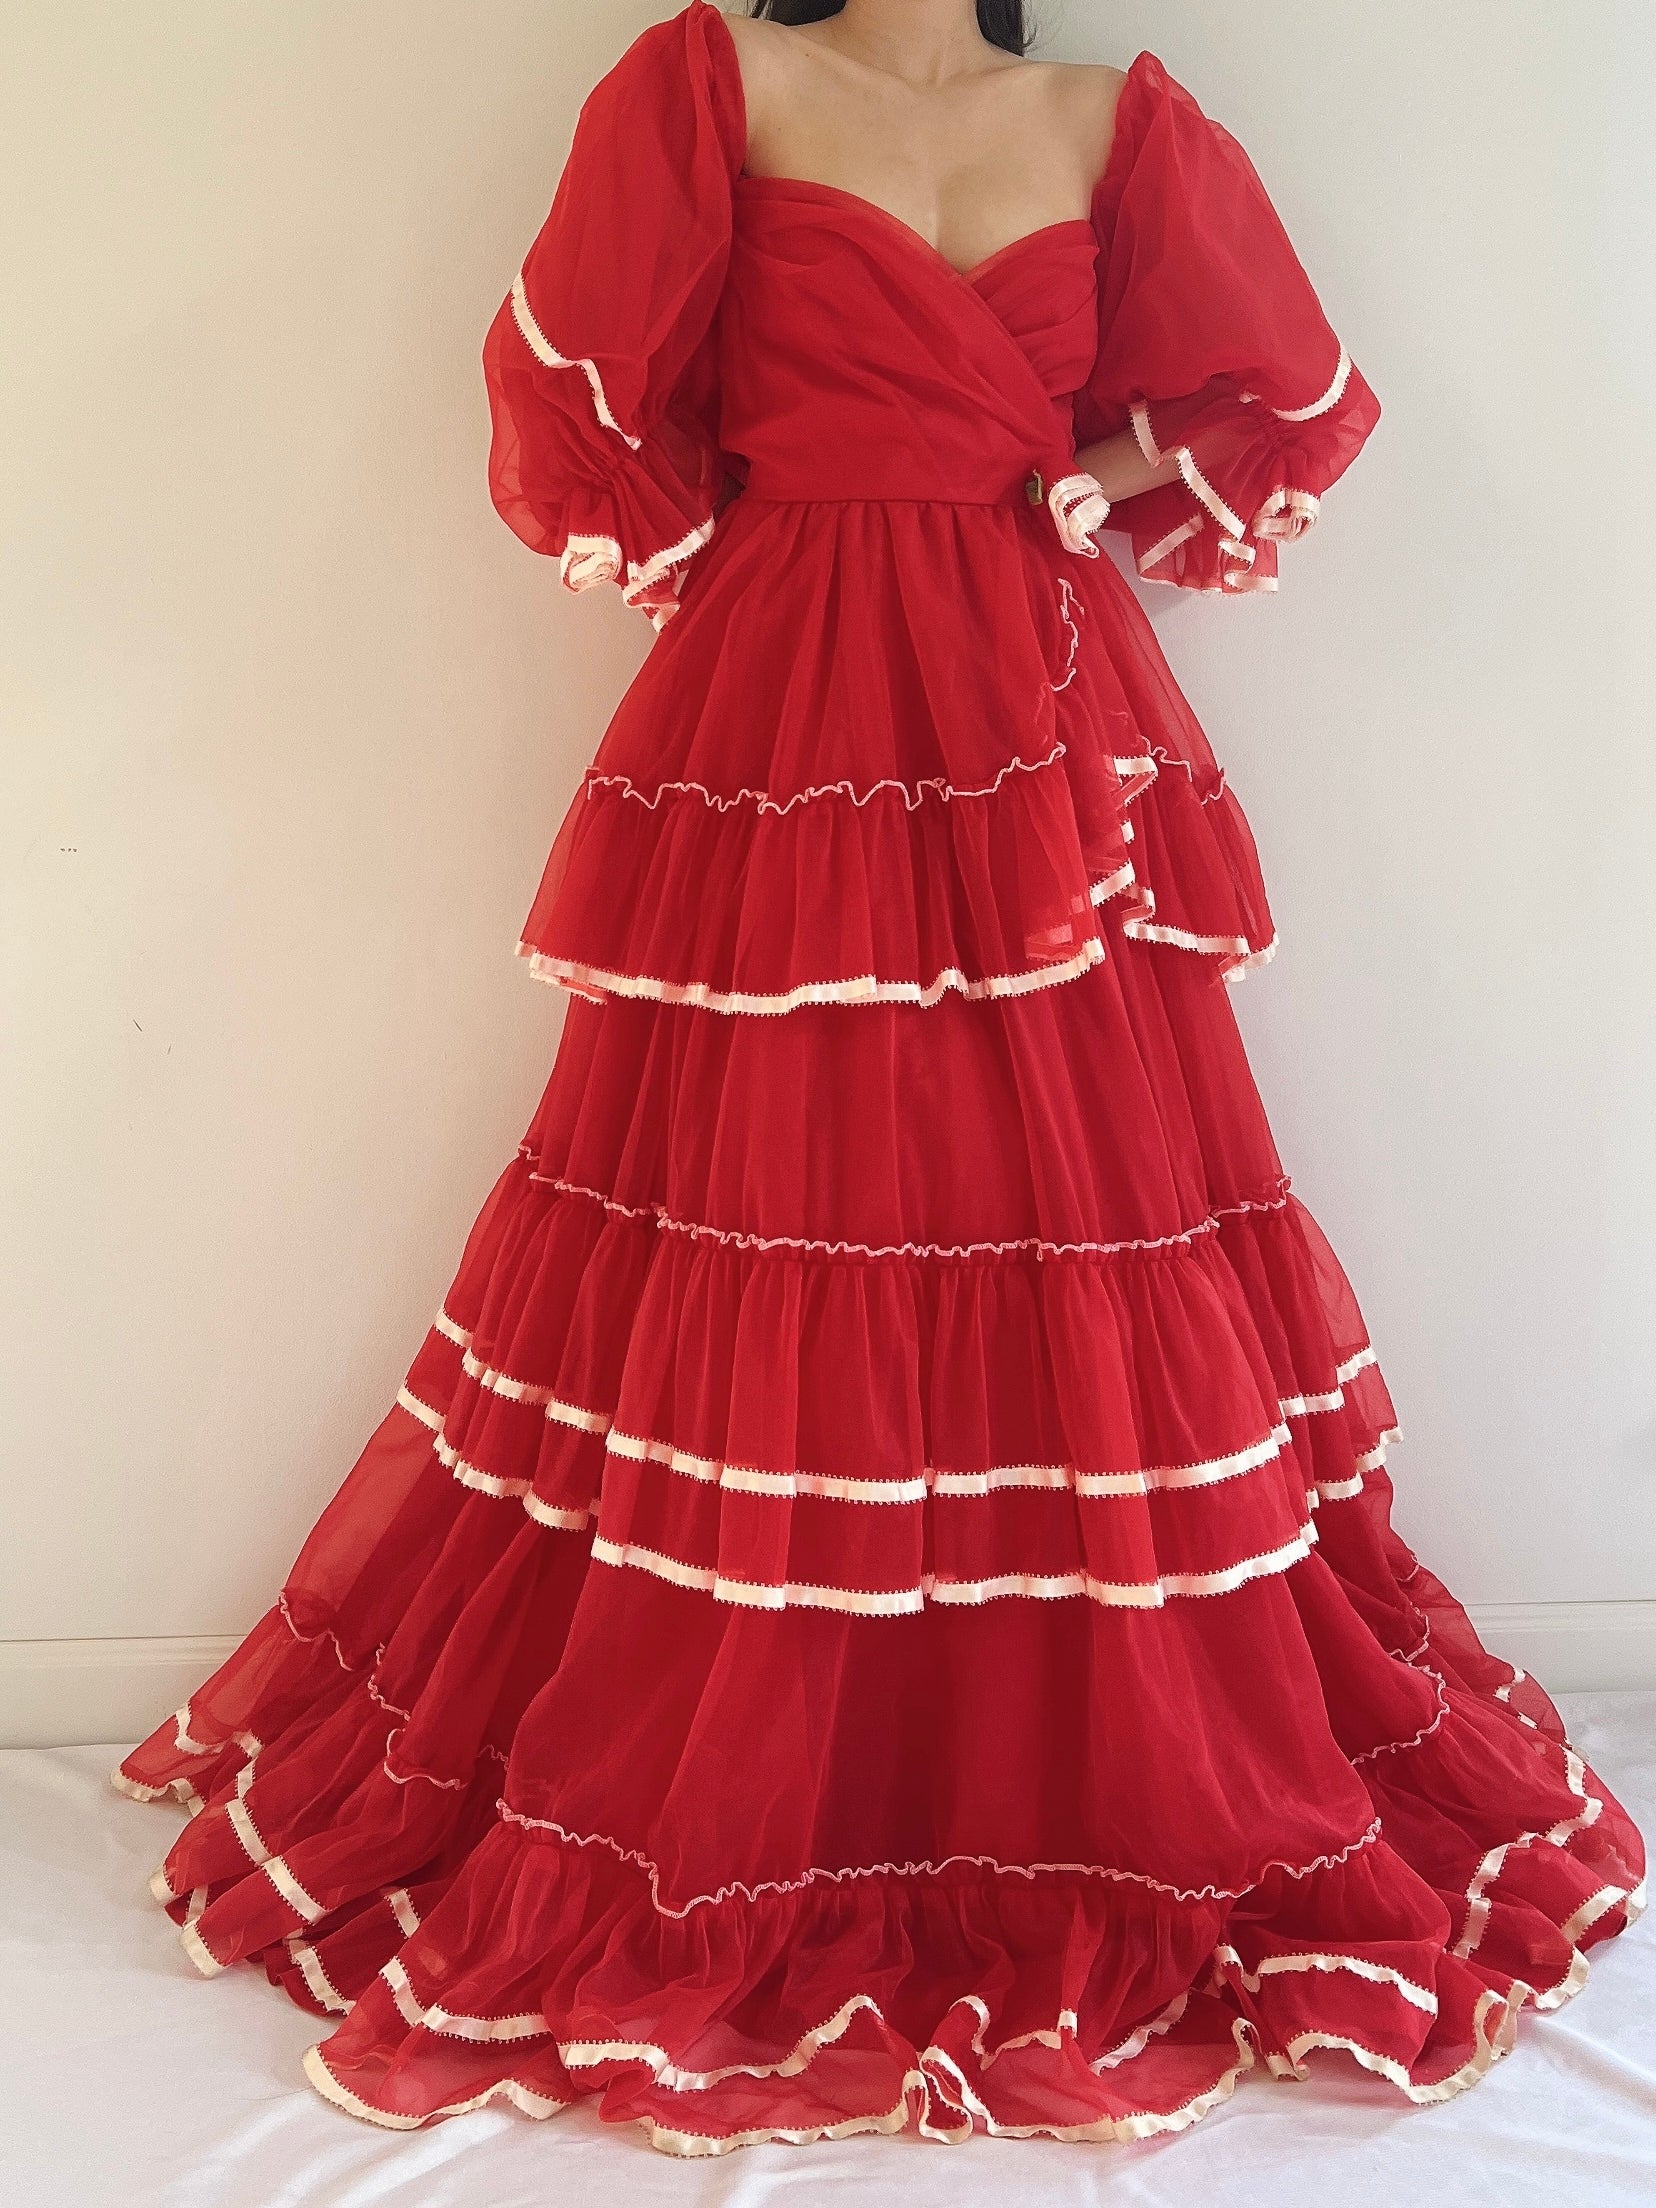 Vintage Nylon Chiffon Tiered Gown - XS/S